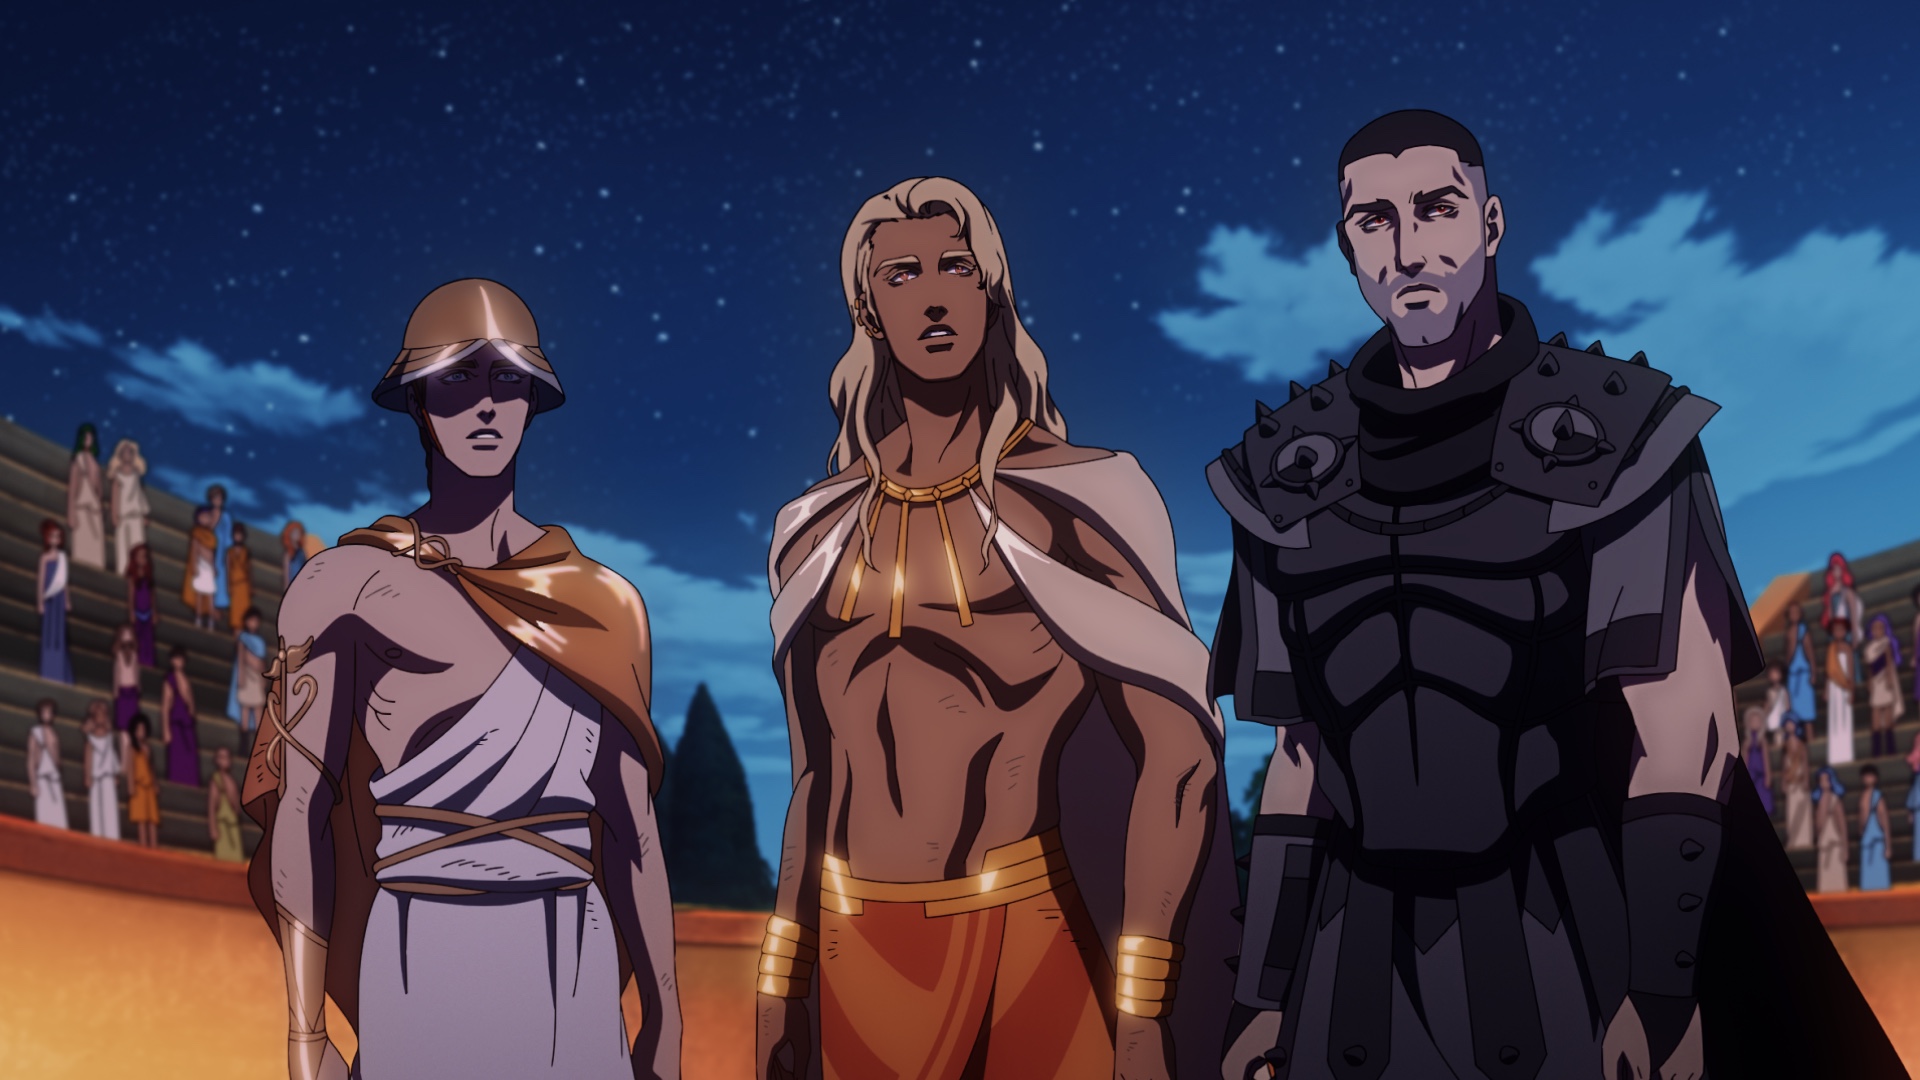 First Look At Netflix's 'Blood of Zeus' Anime By Castlevania Studio  Arriving This October | Geek Culture